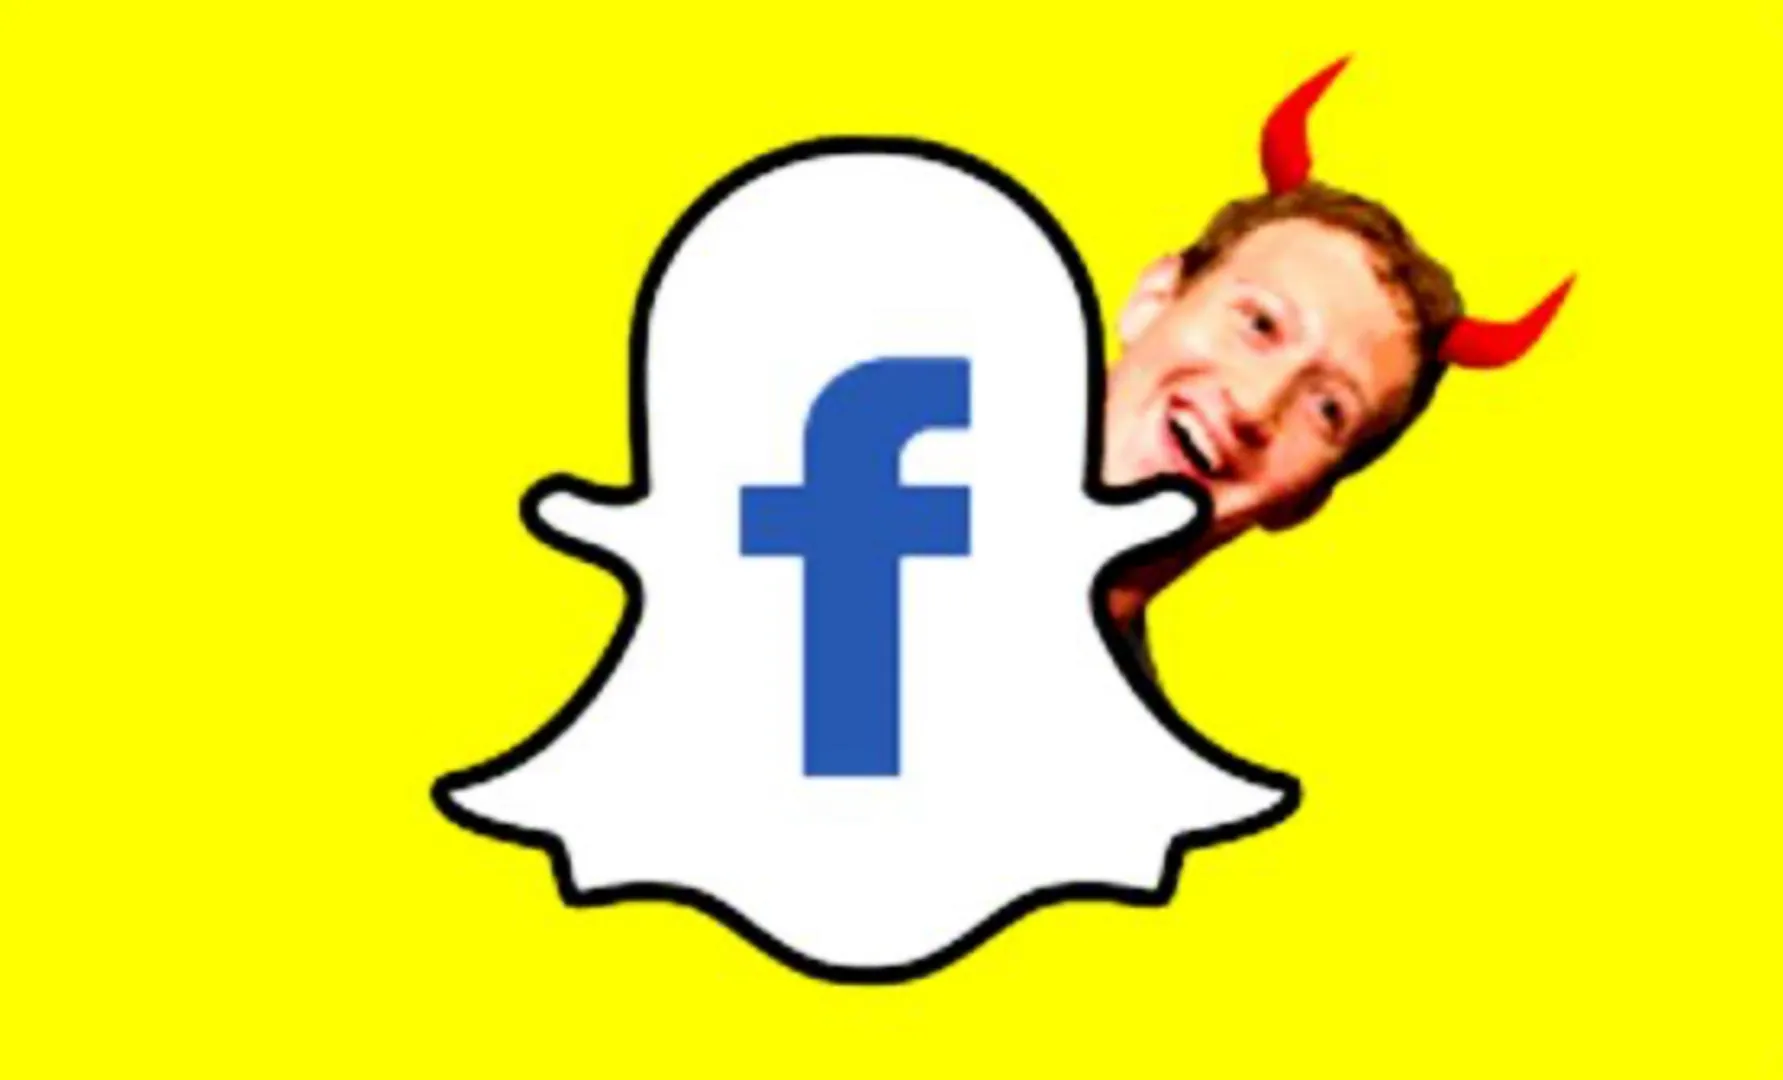 DID YOU KNOW?

In 2013, Snapchat rejects Facebook's offer to buy the company for $3 billion. in 2021, Snapchat hits $100 billion in market valuation.